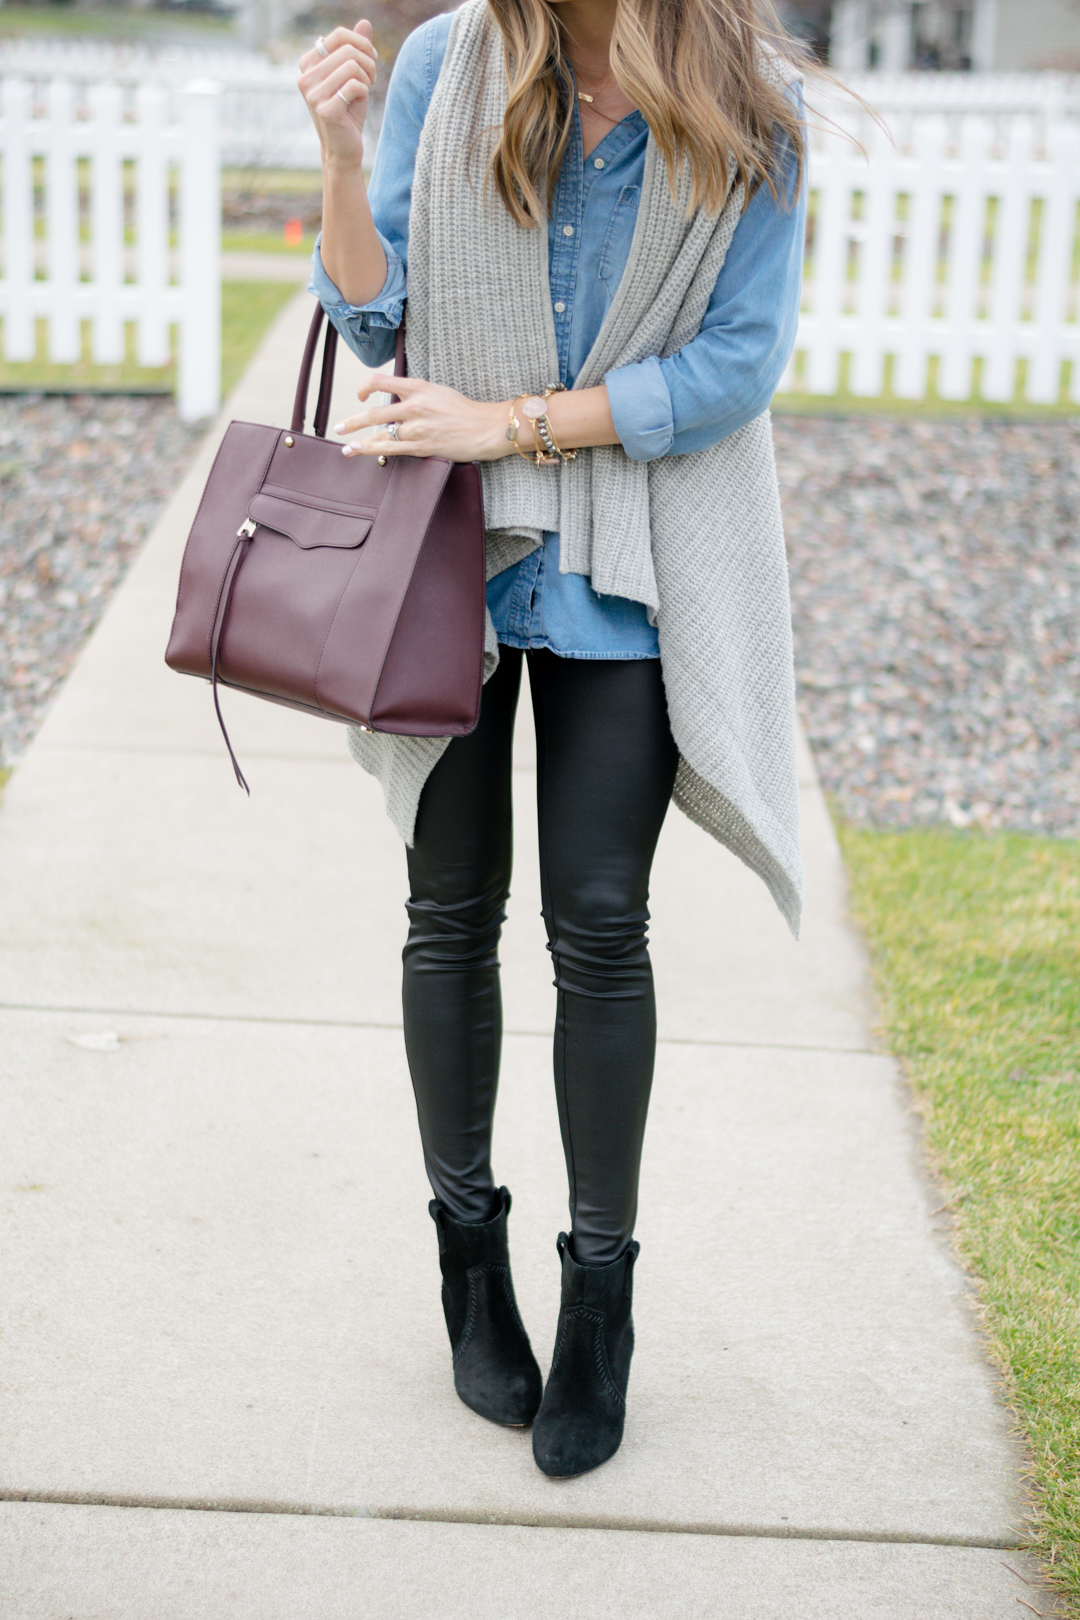 Grey Leggings with Grey Sweater Outfits (6 ideas & outfits